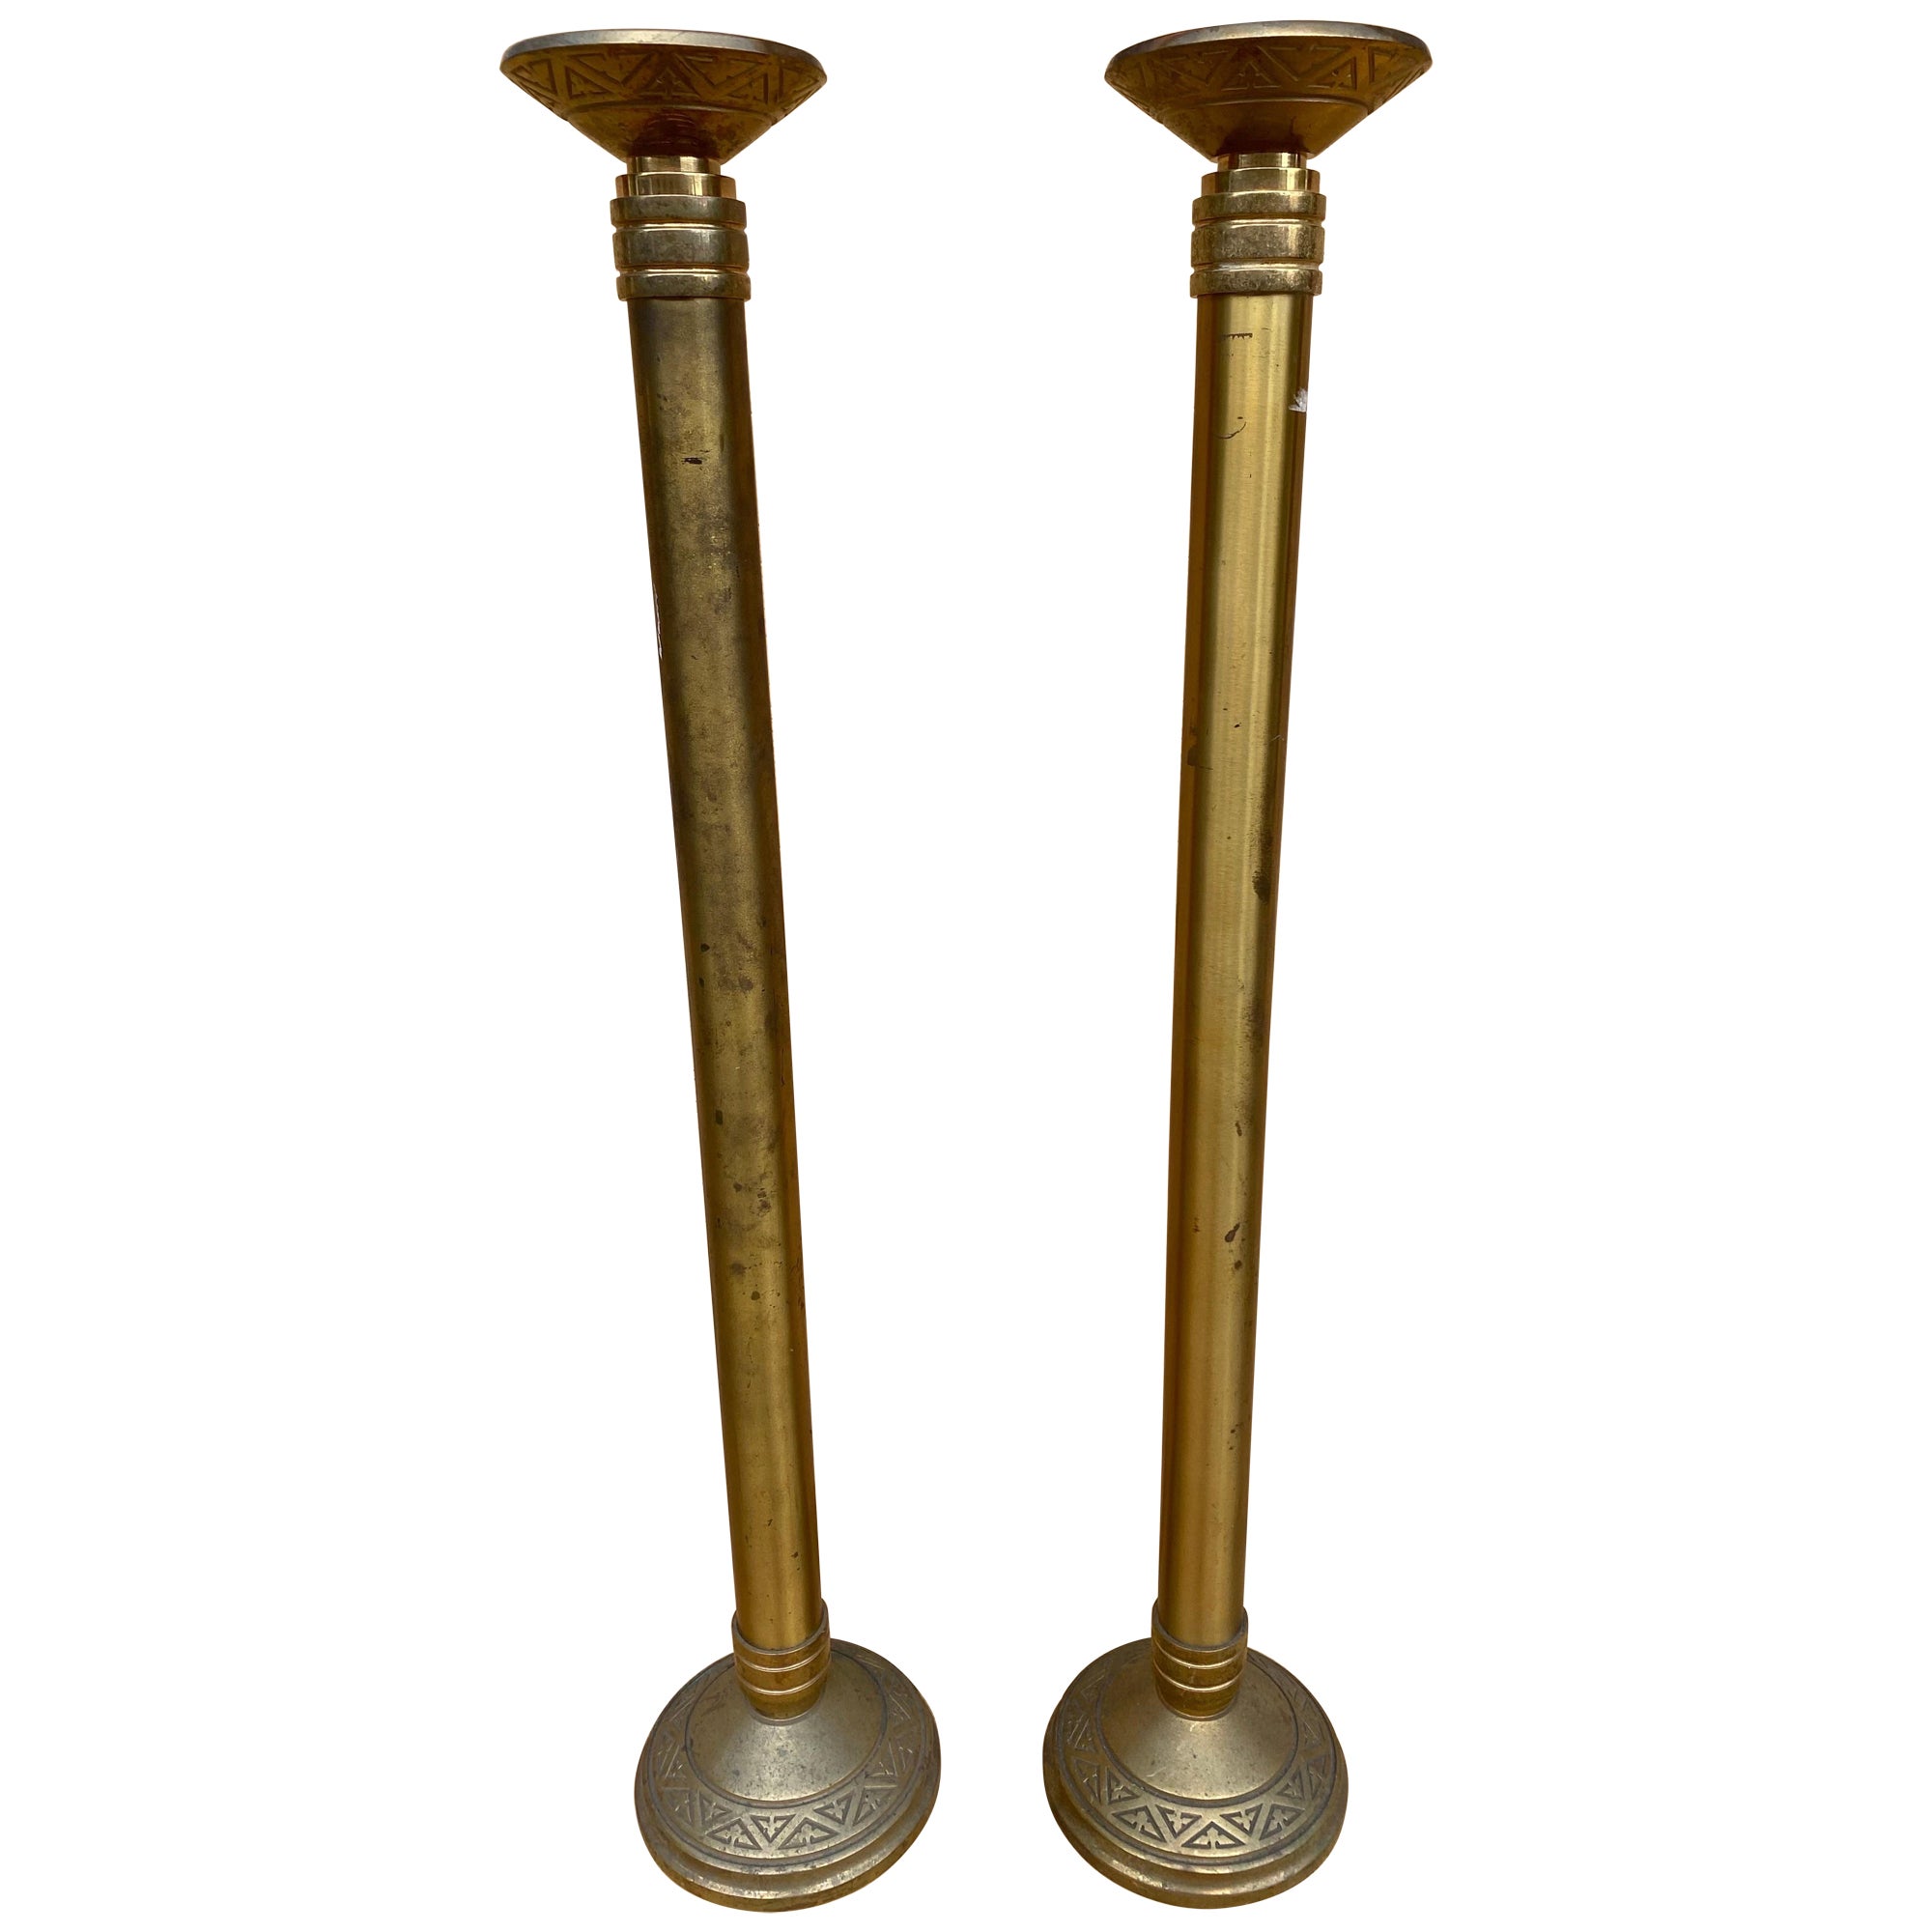 Antique Church Altar Floor Candle Holders